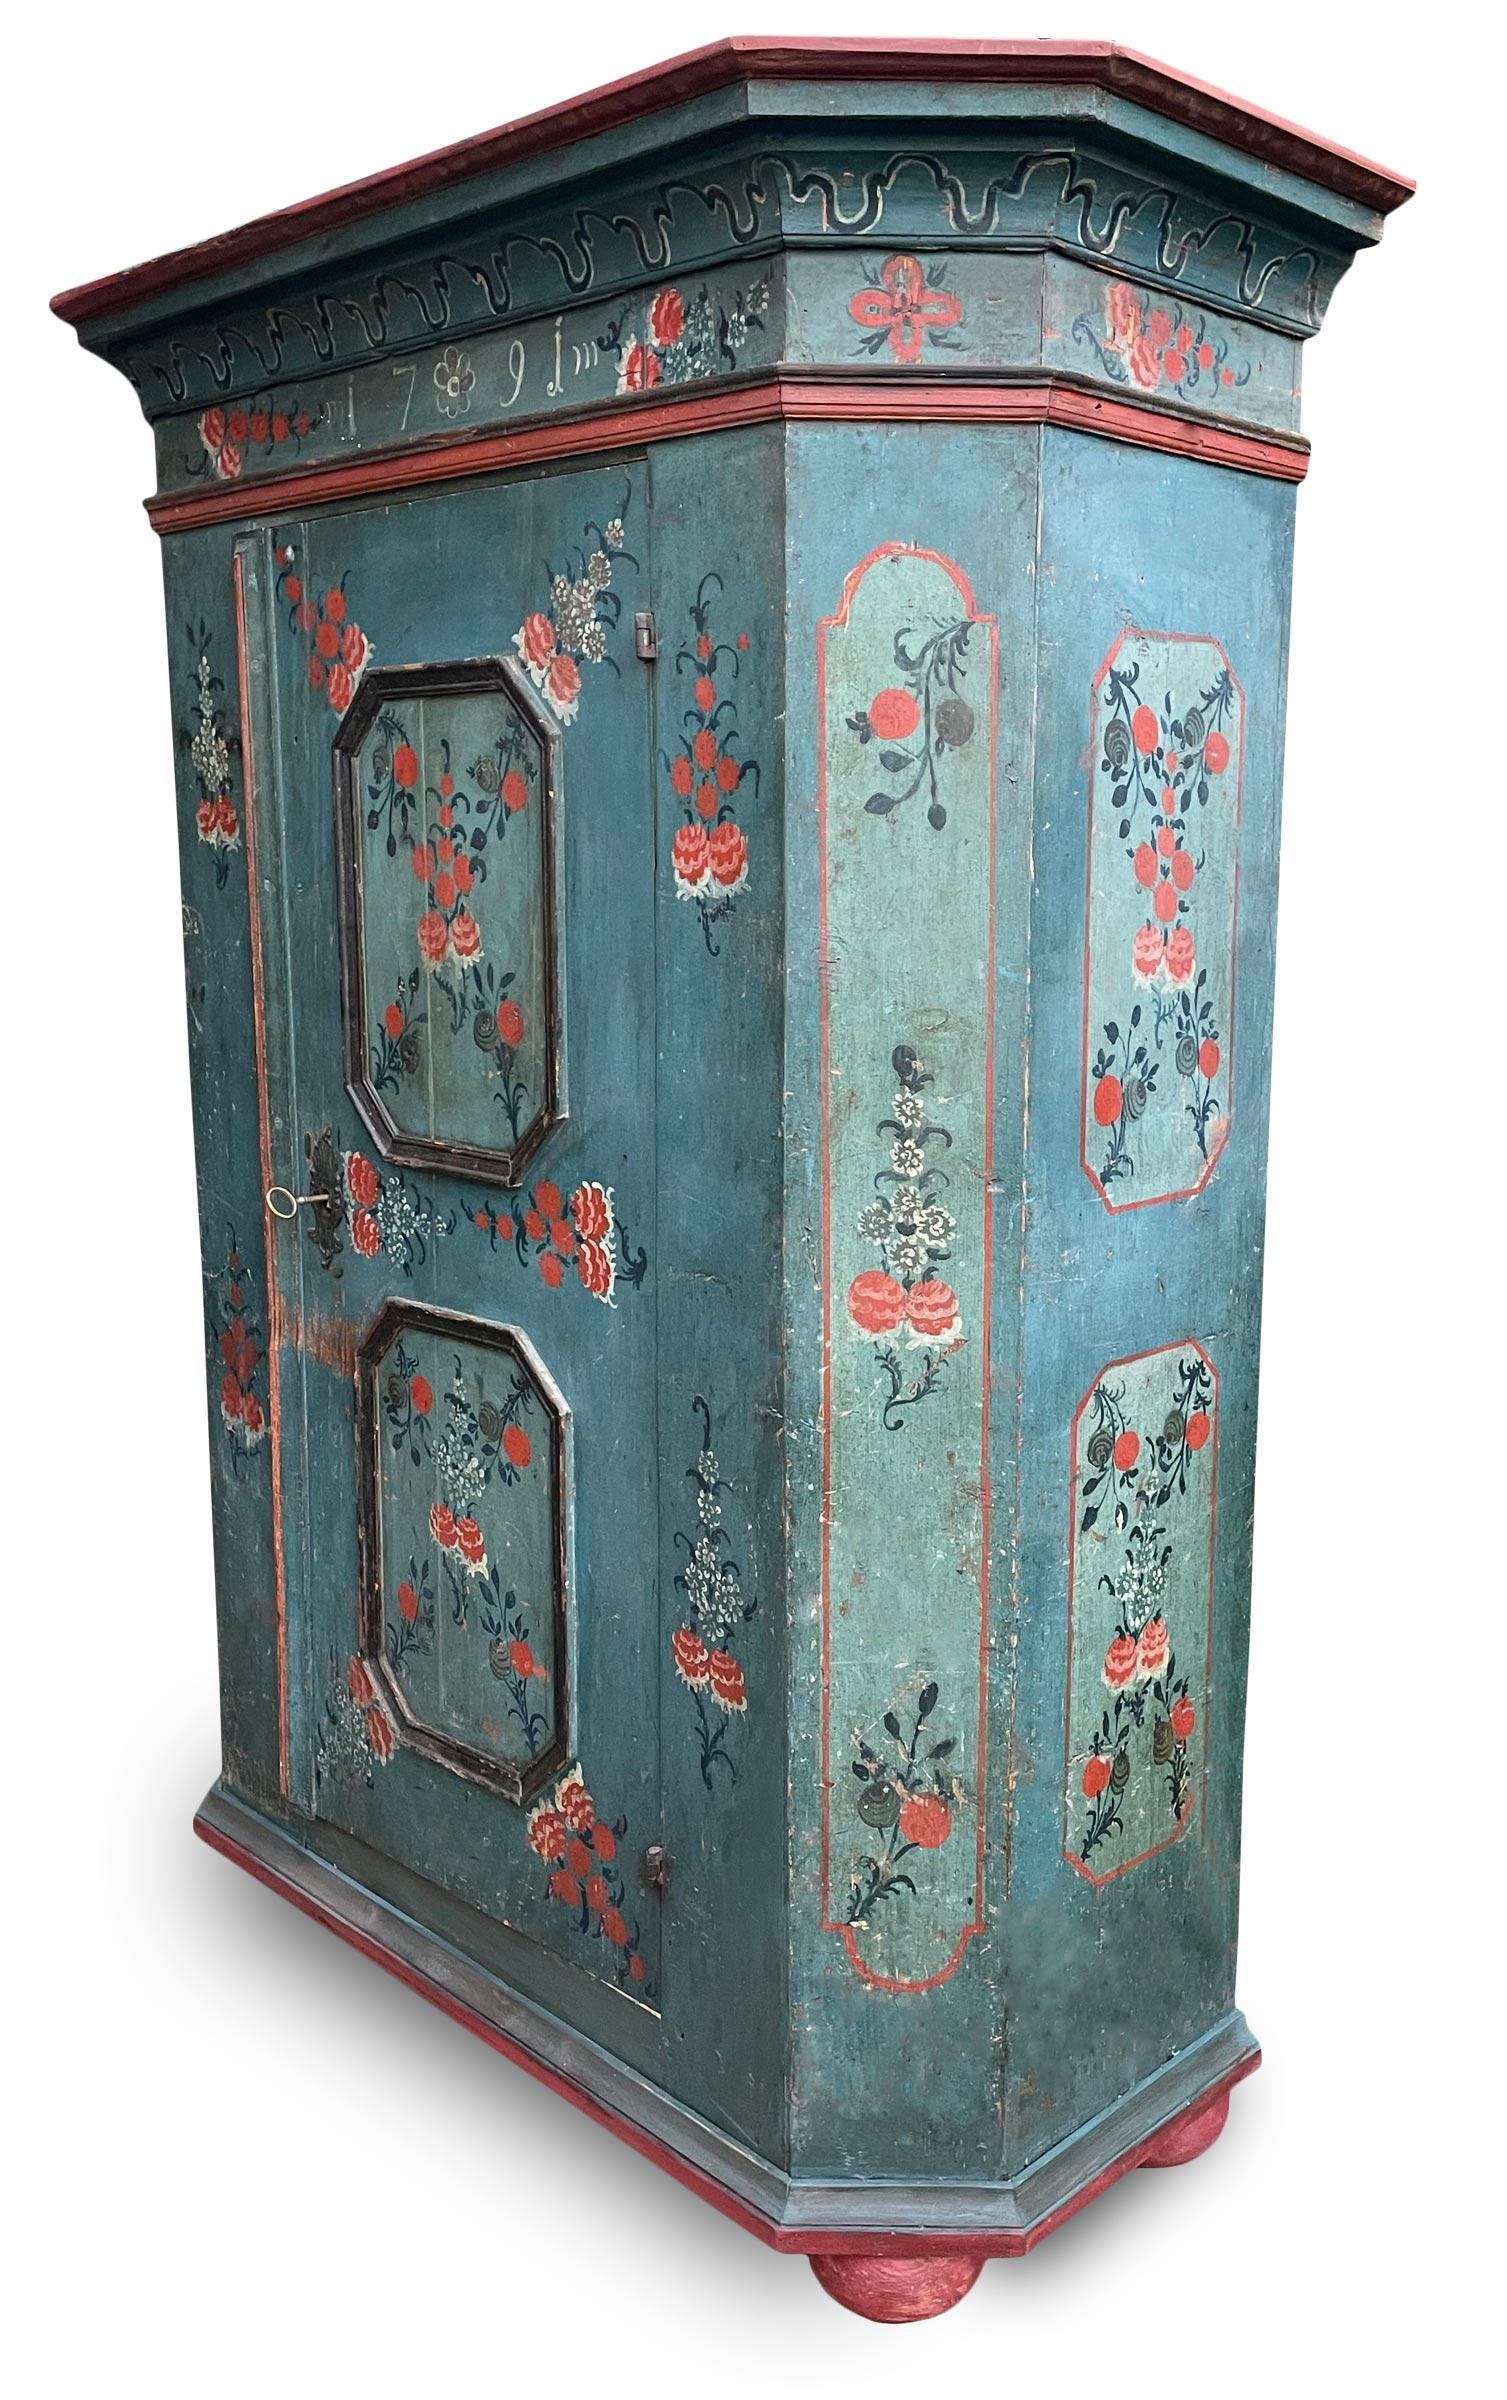 Central Europe (Tyrol) blue wardrobe dated 1791

H.174 - L.120 (140 to the frames) - P.46 (56 to the frames)

Tyrolean painted wardrobe with one door, entirely painted in blue.

On the door two octagon-shaped framed panels enclose bright white